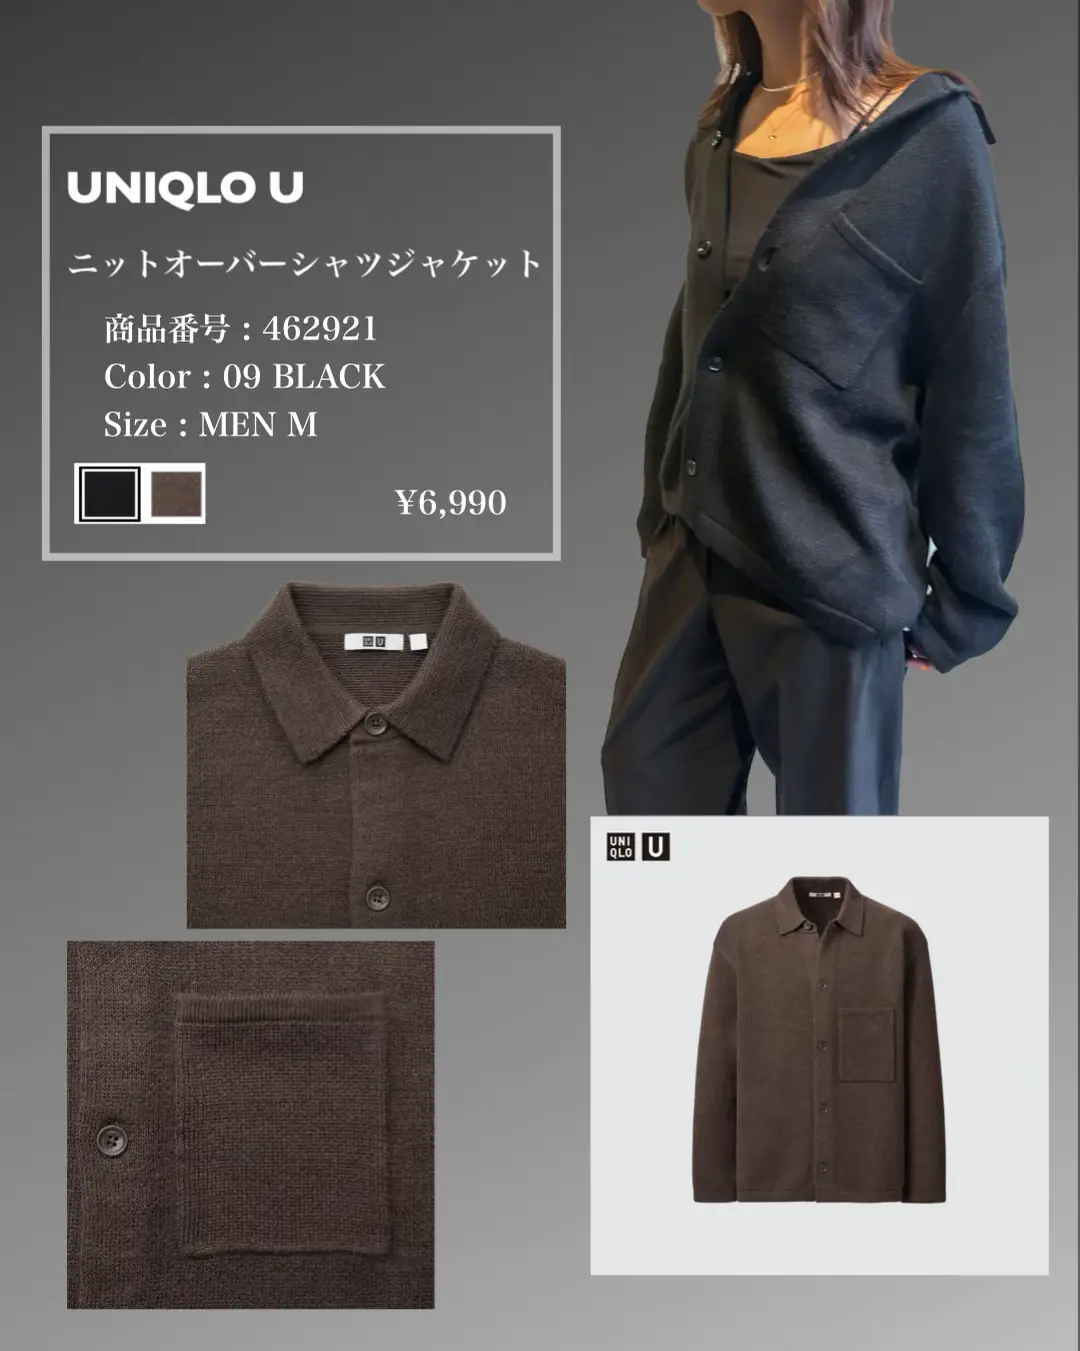 UNIQLO U 】 Highly recommended with men's knit ‼ ︎ High-looking